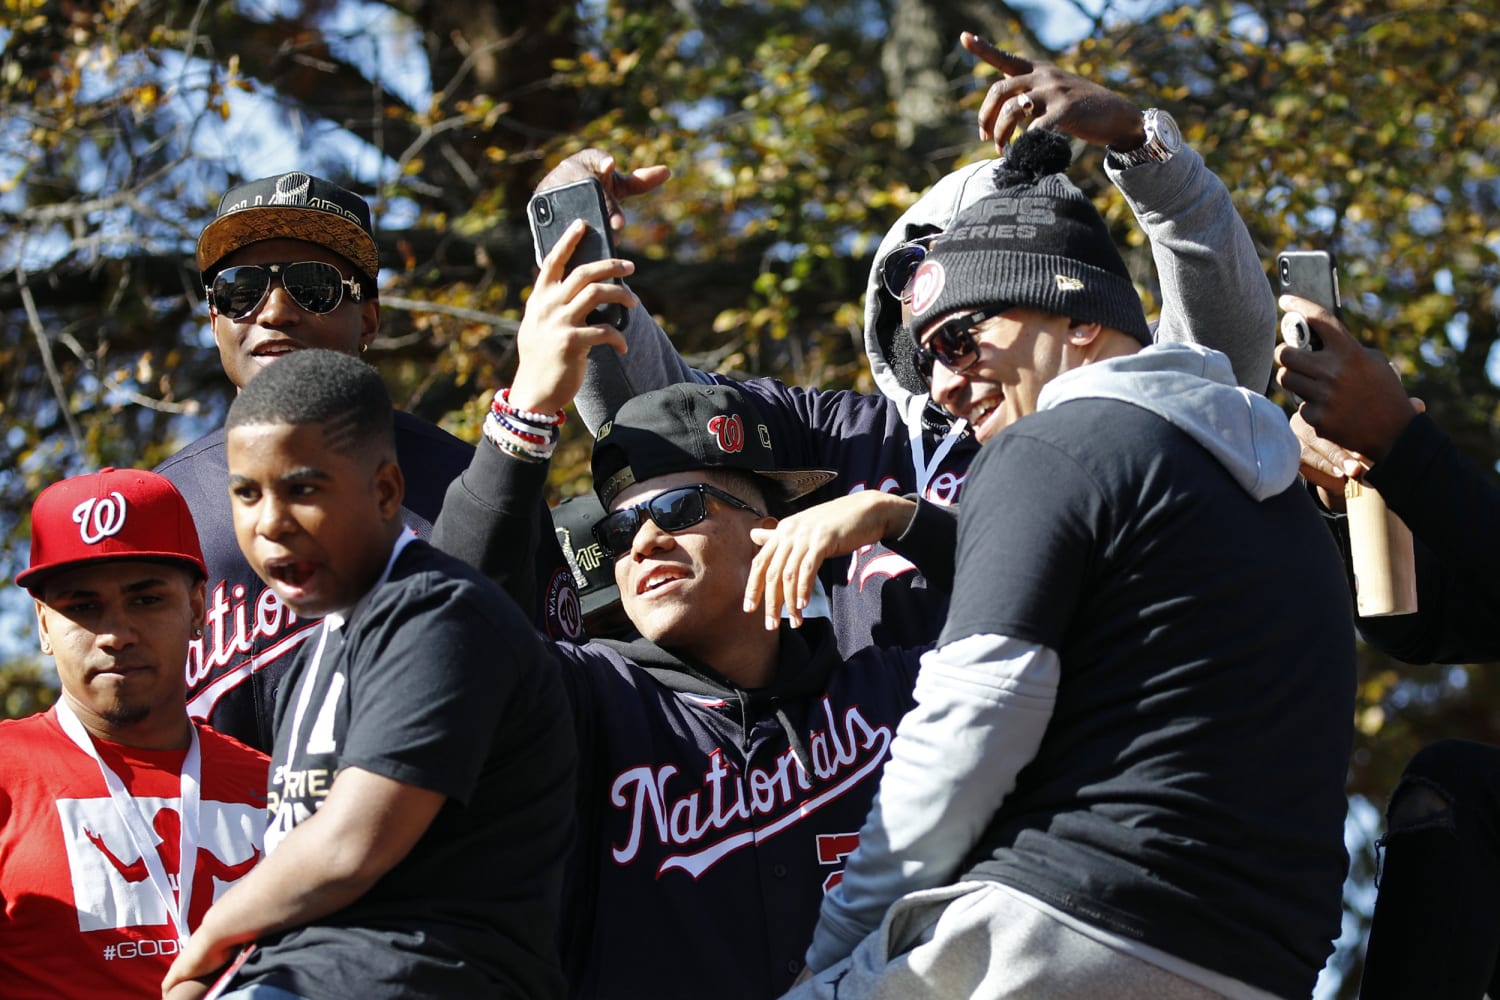 Thousands of Washington Nationals fans turn out for World Series